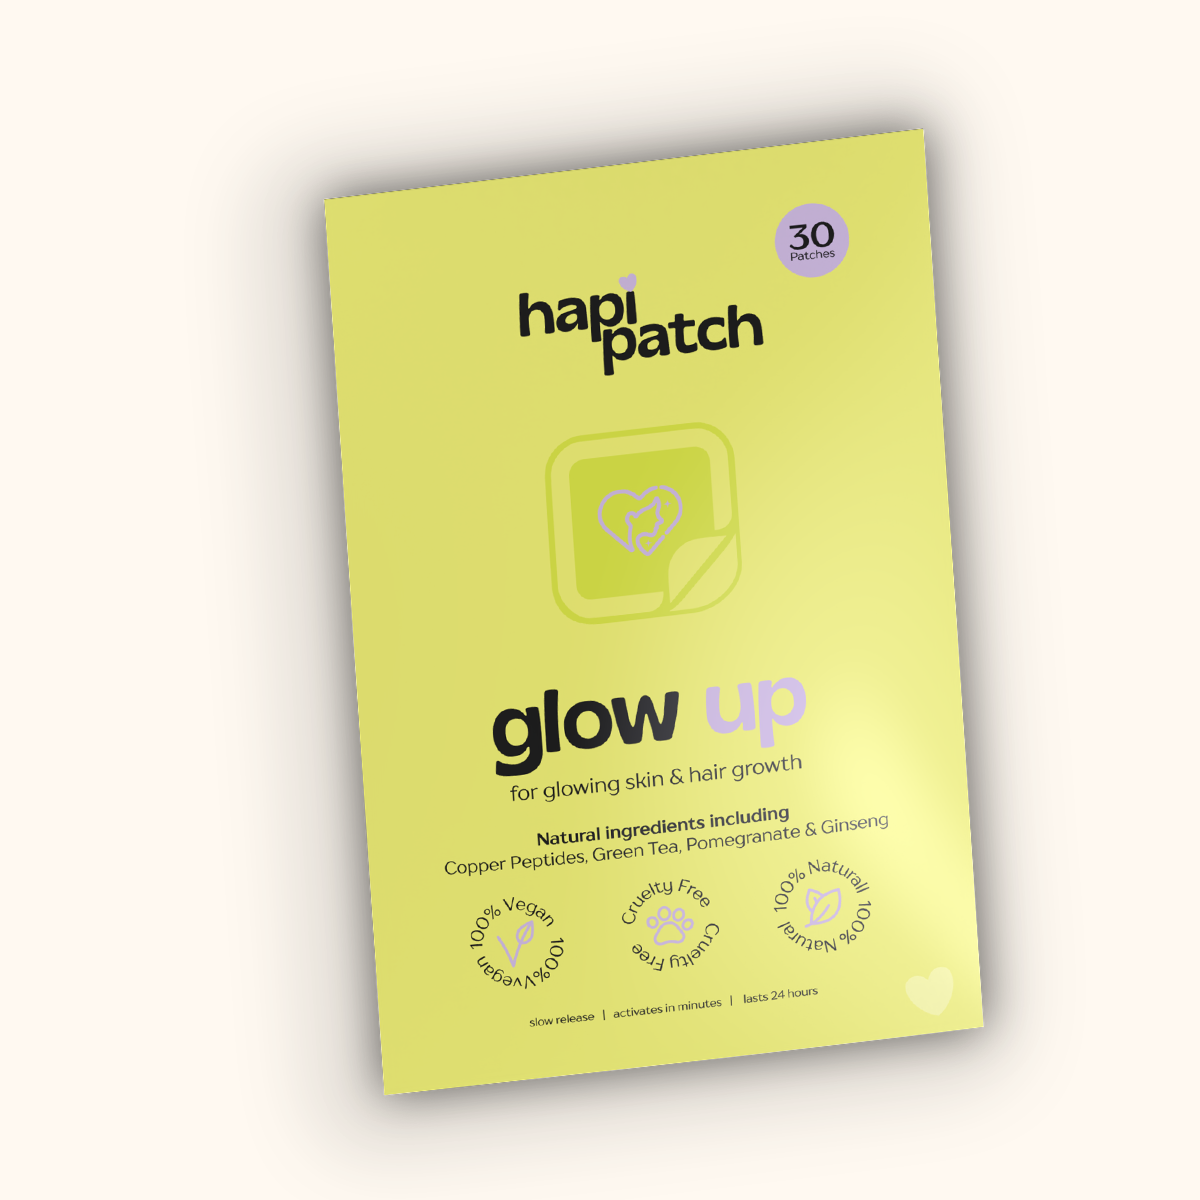 Glow Up Copper Peptide Patches